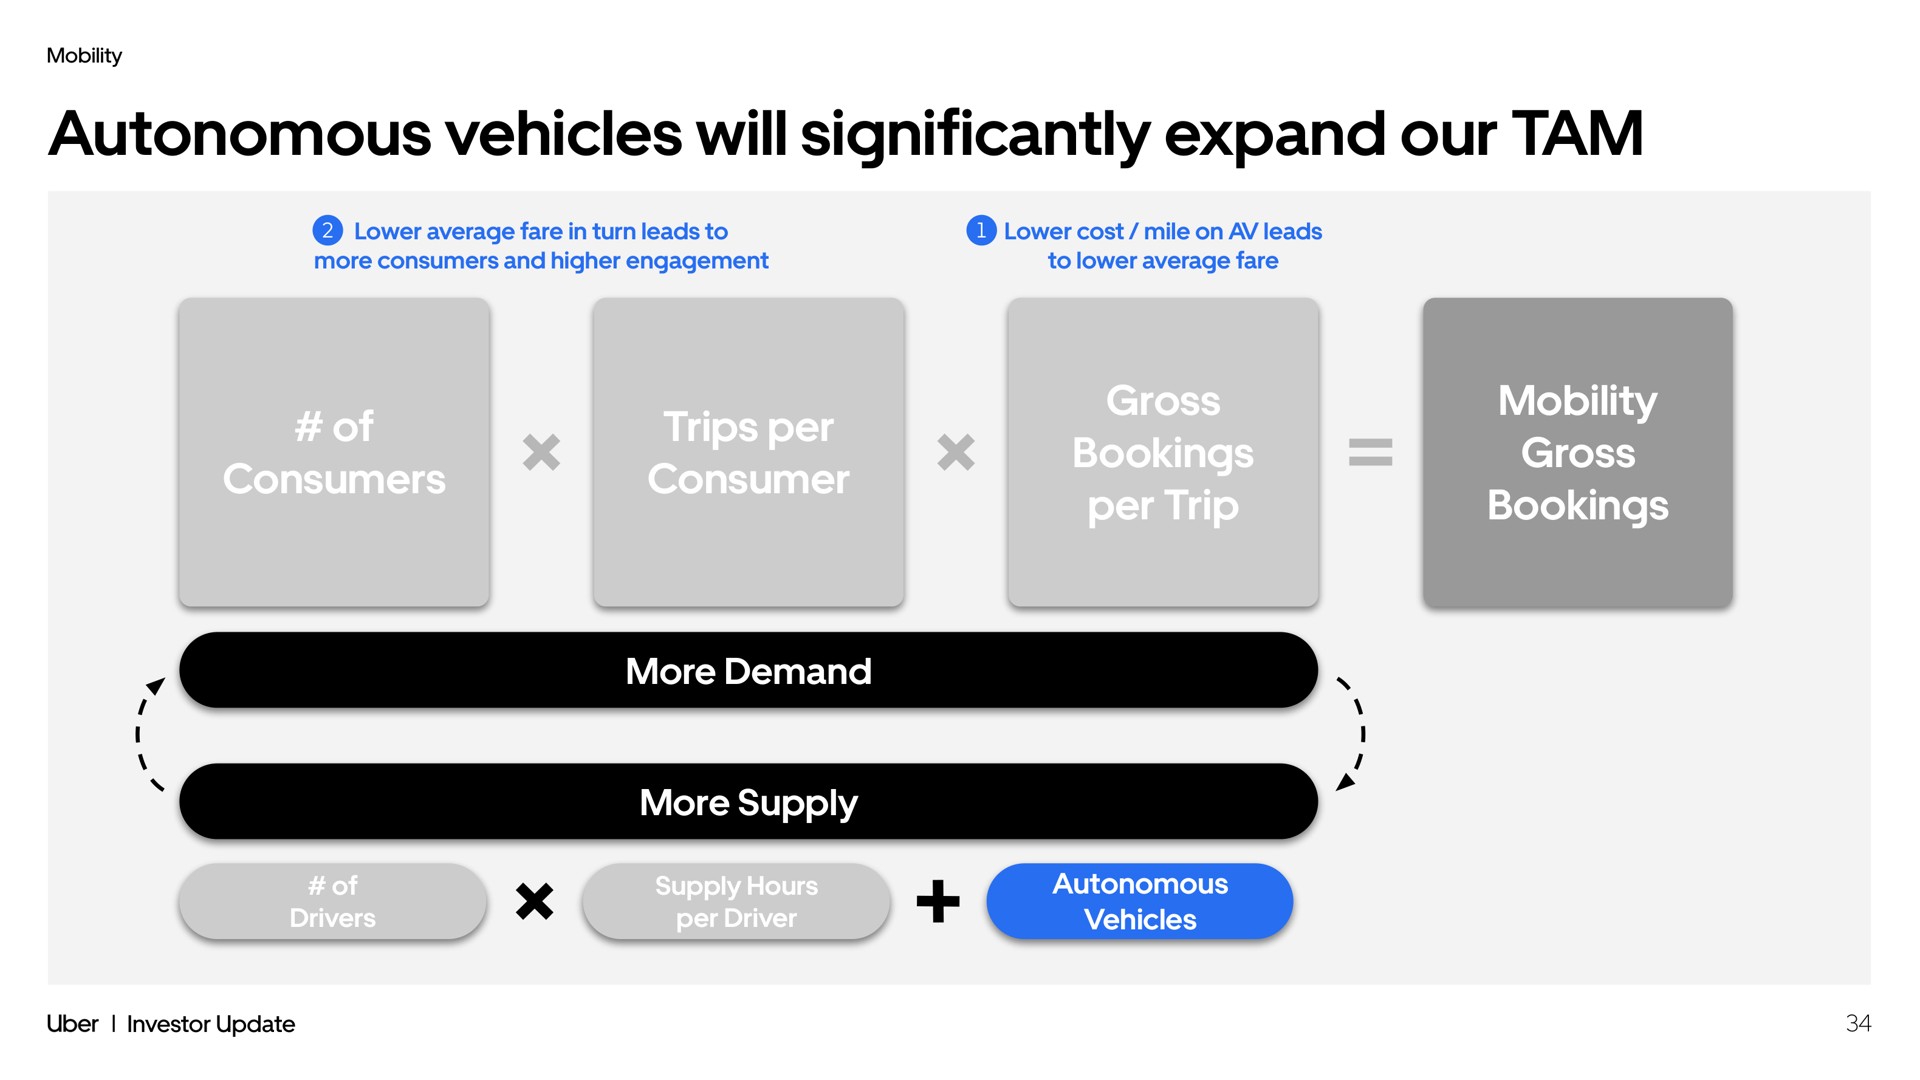 autonomous vehicles will significantly expand our tam of consumers trips per consumer gross bookings per trip mobility gross bookings more demand more supply ready for design a | Uber